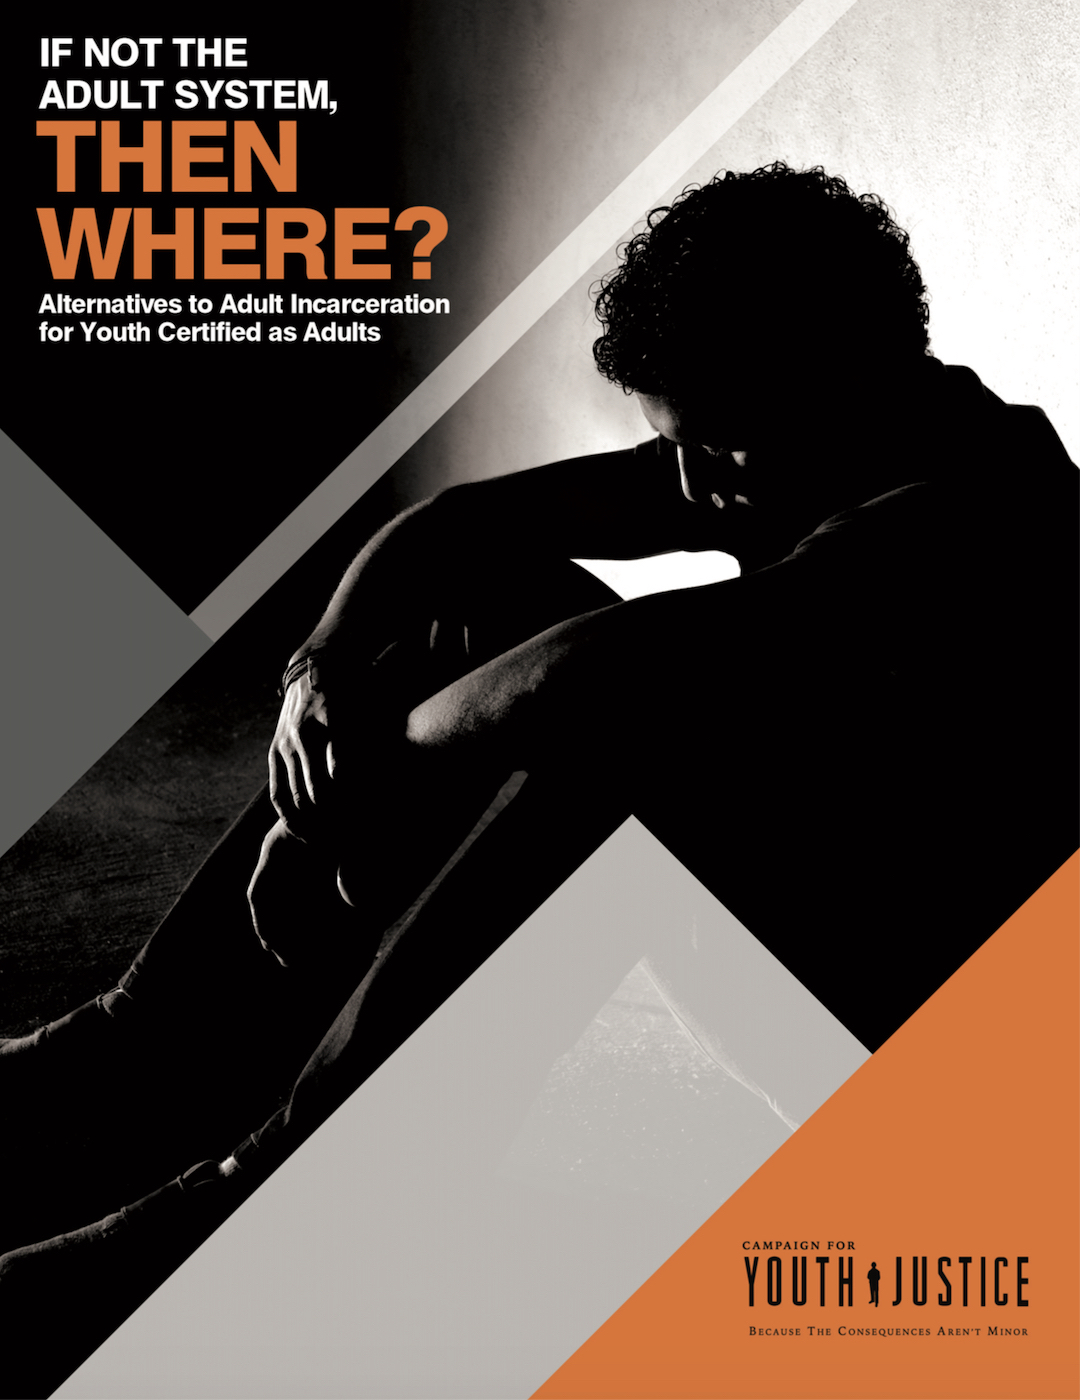 If Not The Adult System,Then Where? Alternatives to Adult Incarceration For Youth Certified Adults